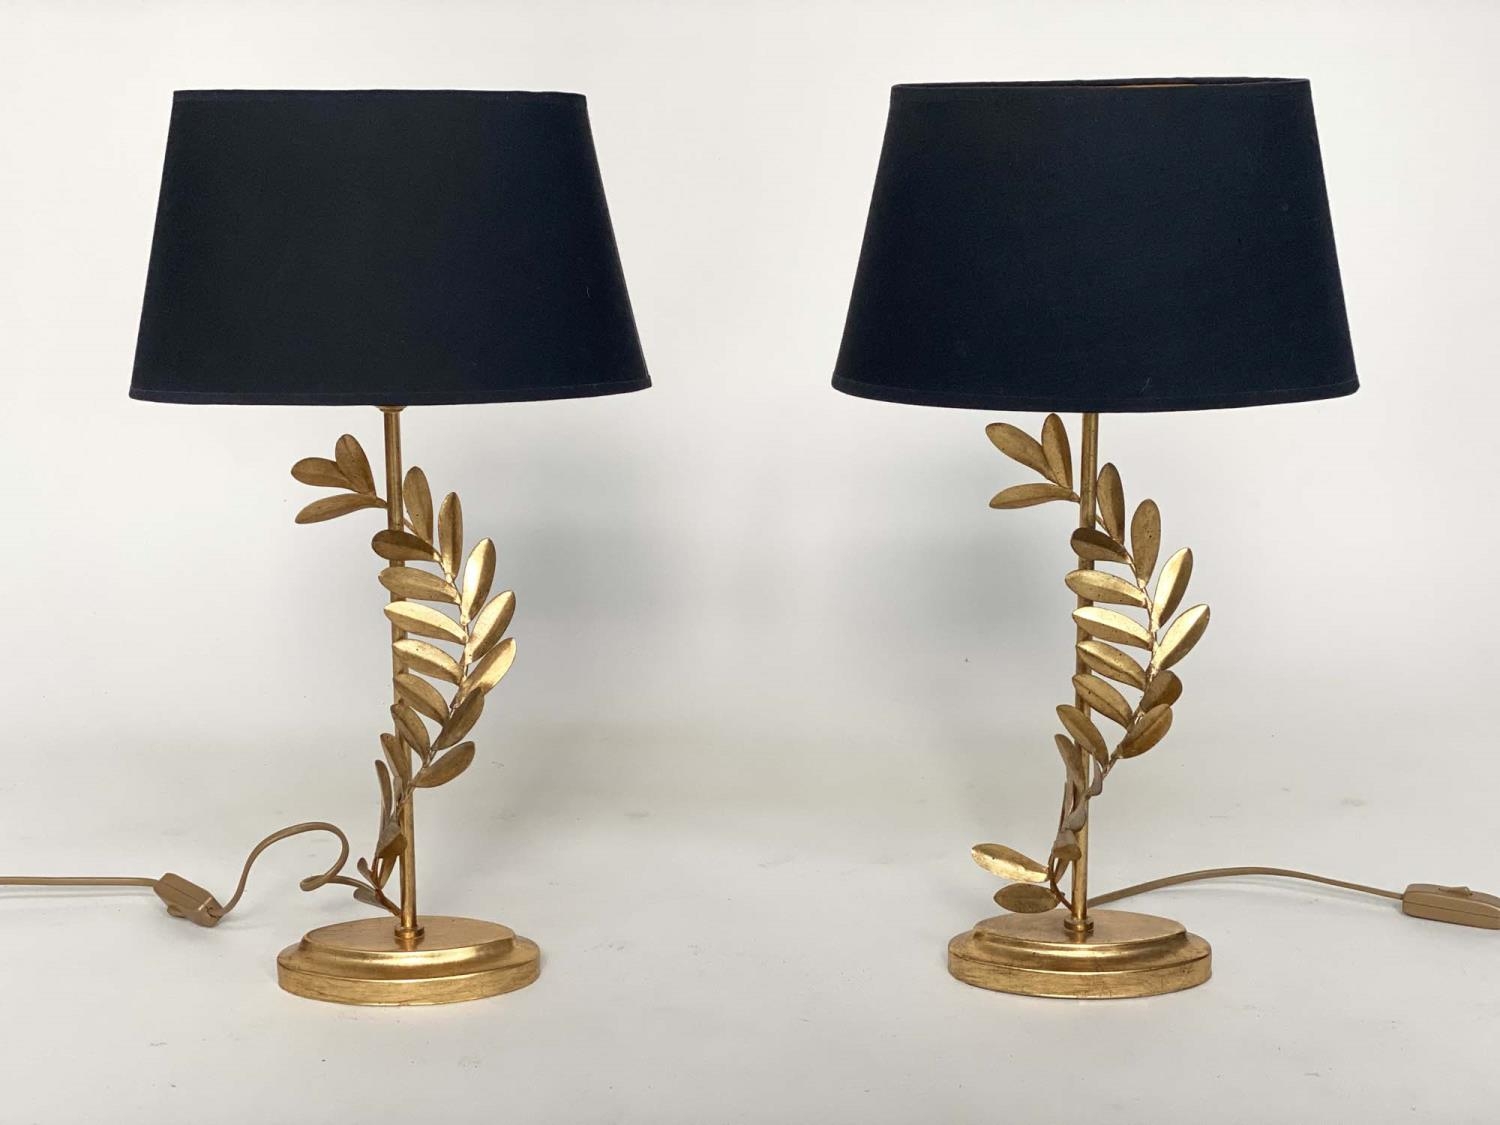 TABLE LAMPS, a pair, by Laura Ashley oval black shades and fern gilt metal supports, 54cm H. (2) - Image 2 of 5